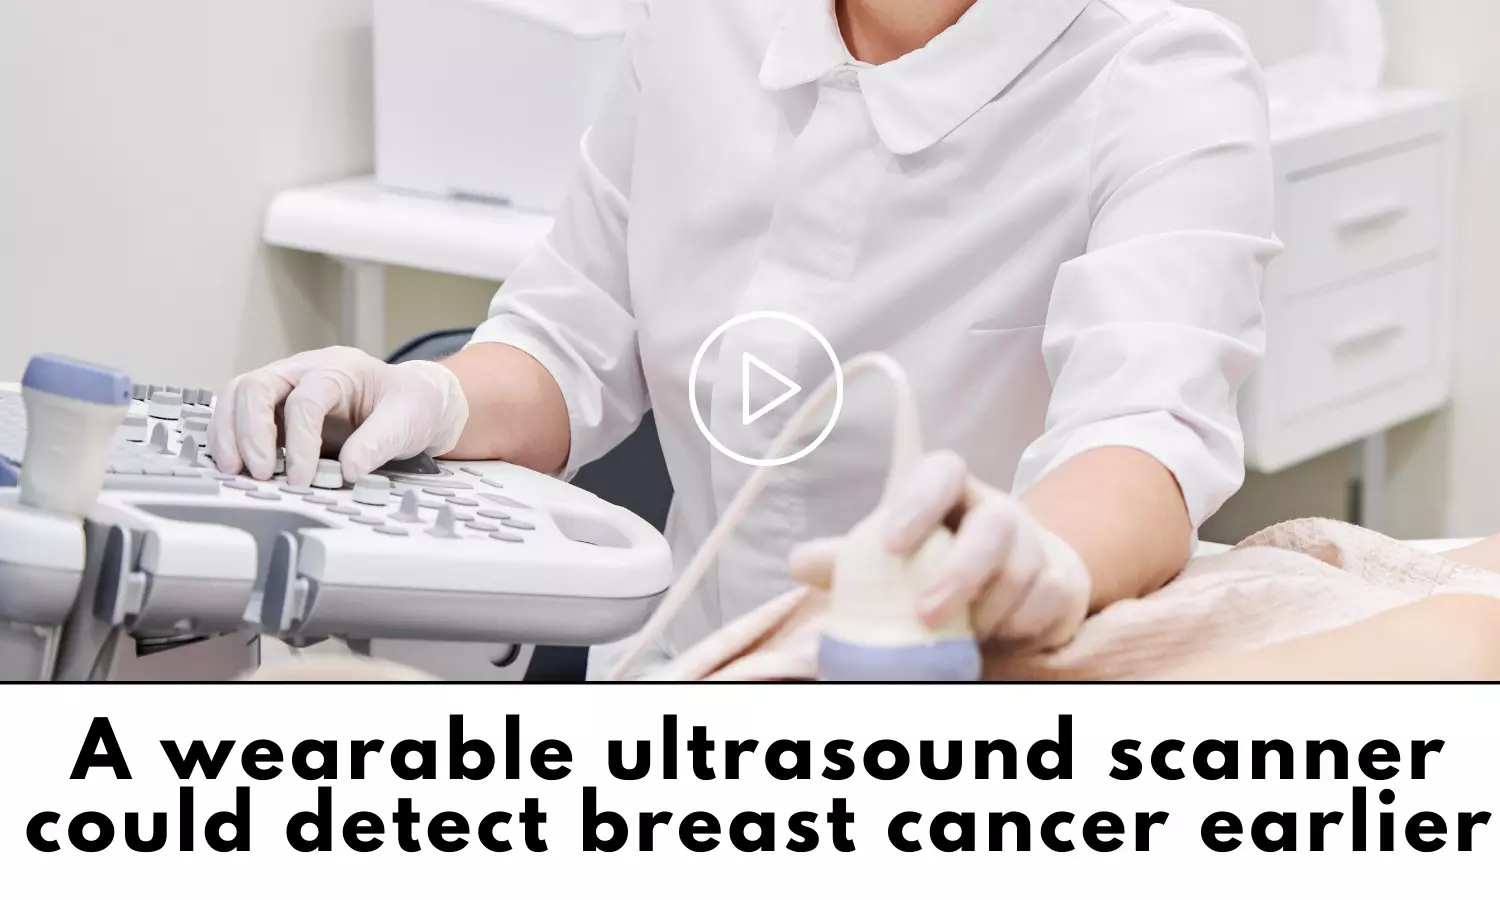 A wearable ultrasound scanner could detect breast cancer earlier